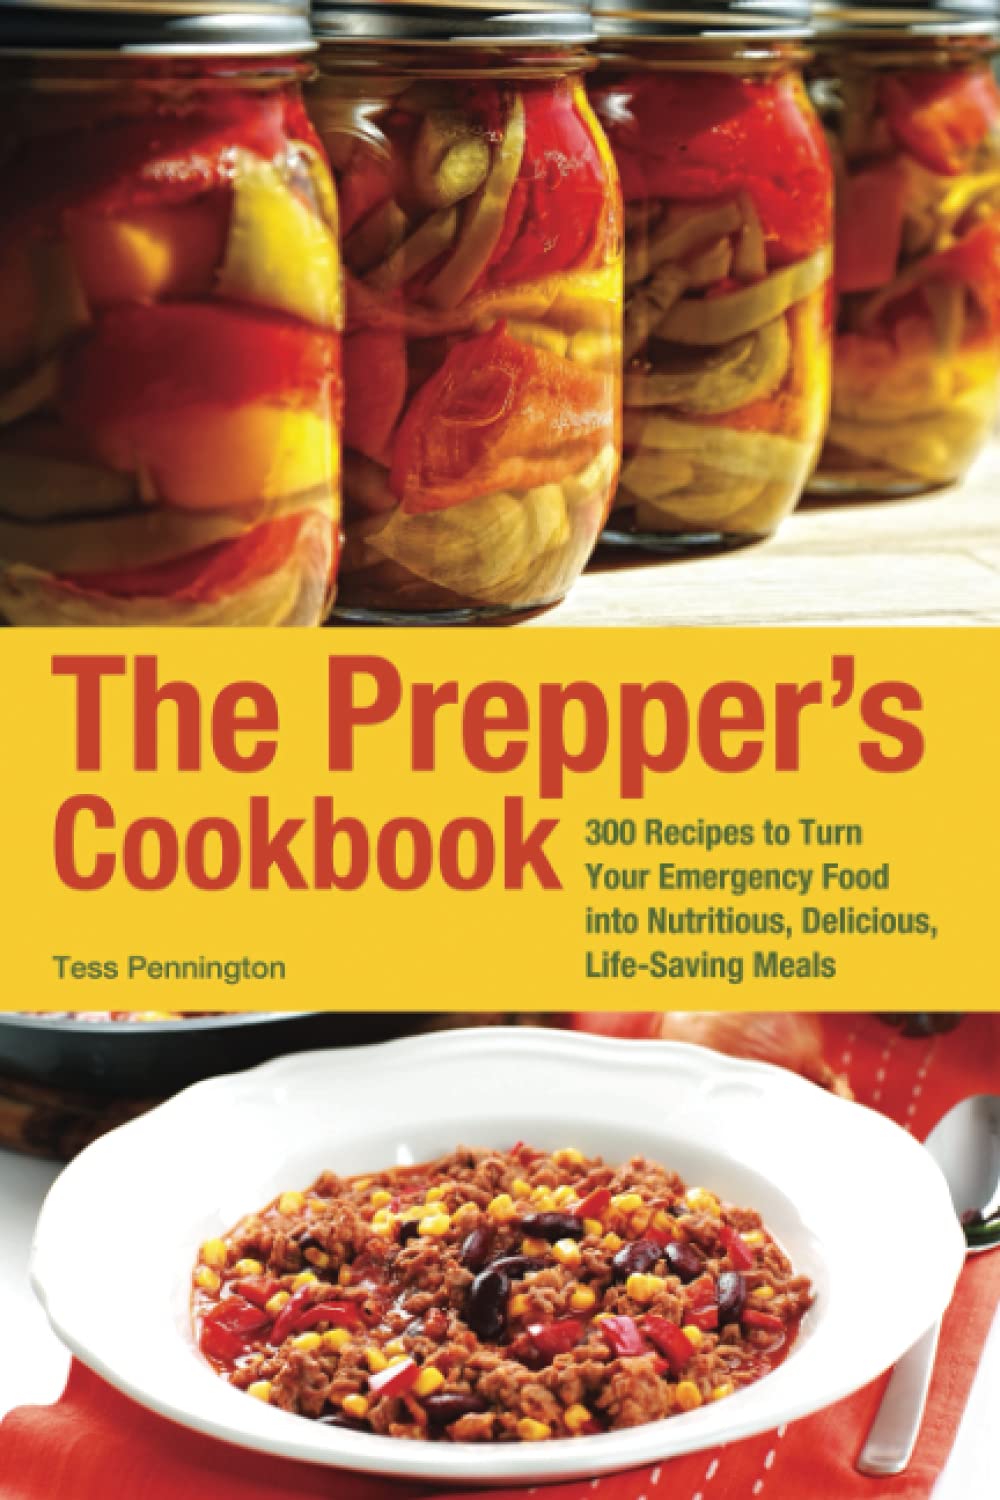 The Prepper’s Cookbook: 300 Recipes to Turn Your Emergency Food into Nutritious, Delicious, Life-Saving Meals